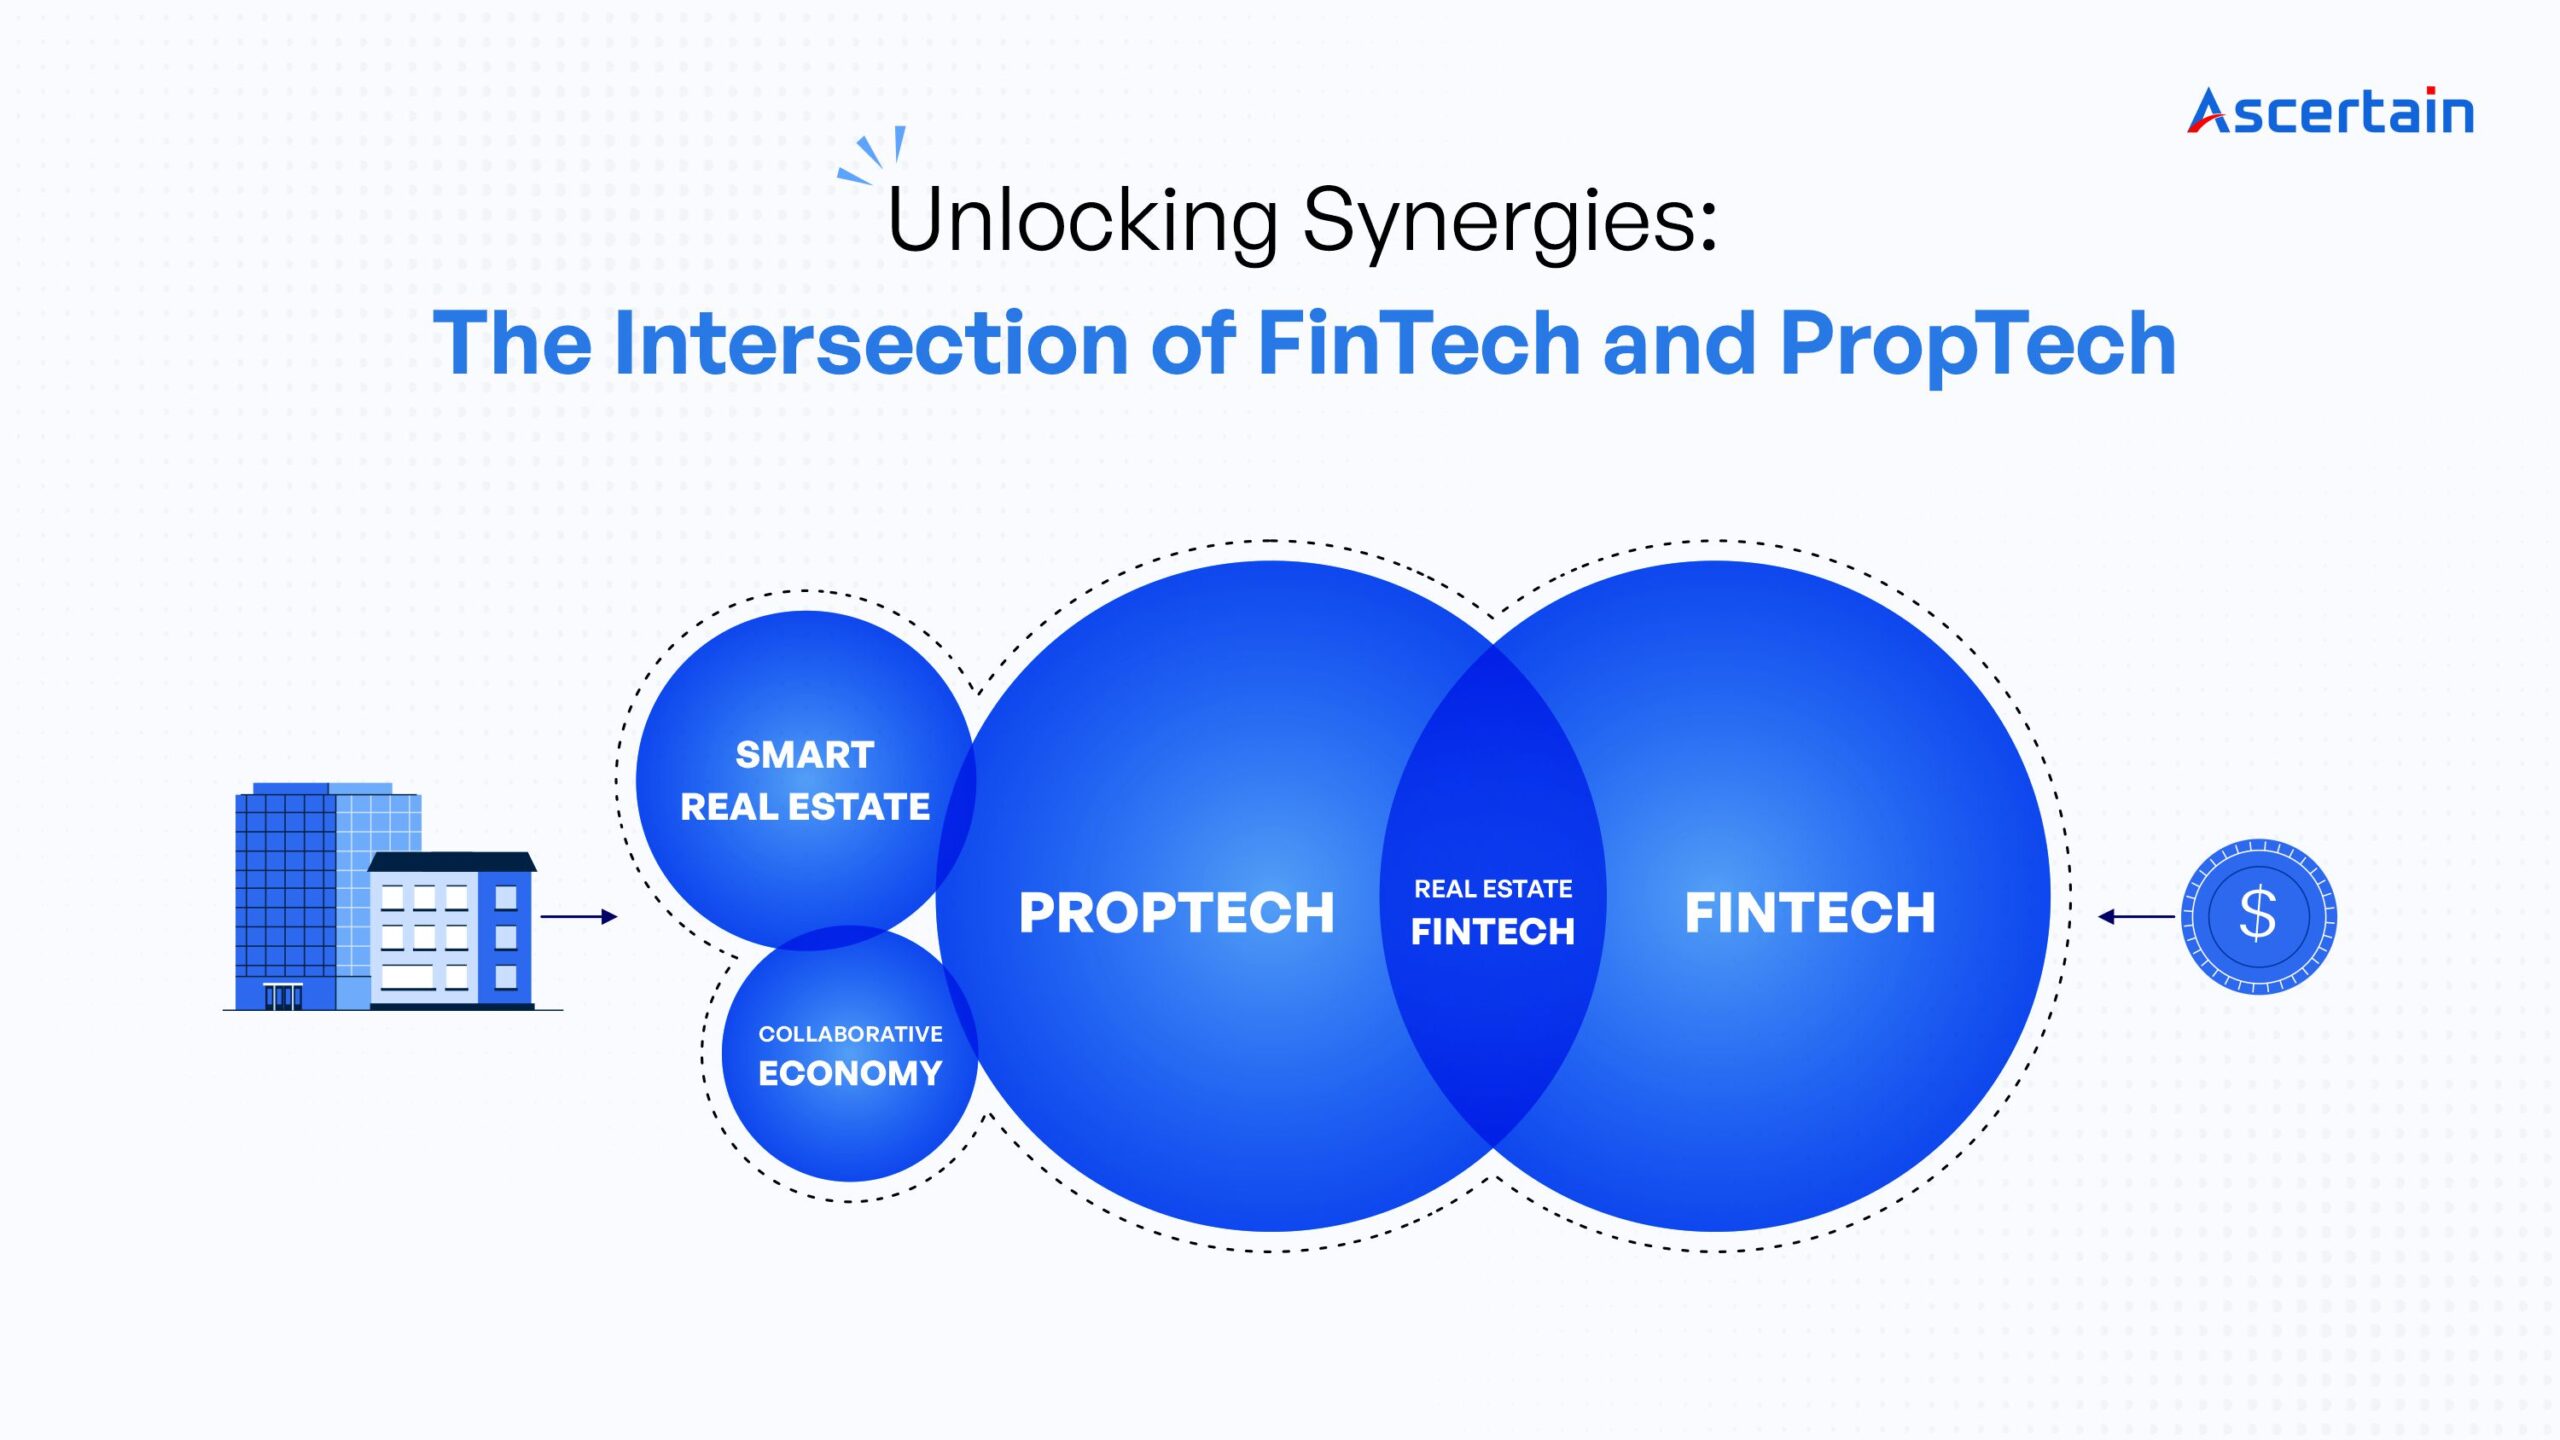 Unlocking Synergies: The Intersection of FinTech and PropTech